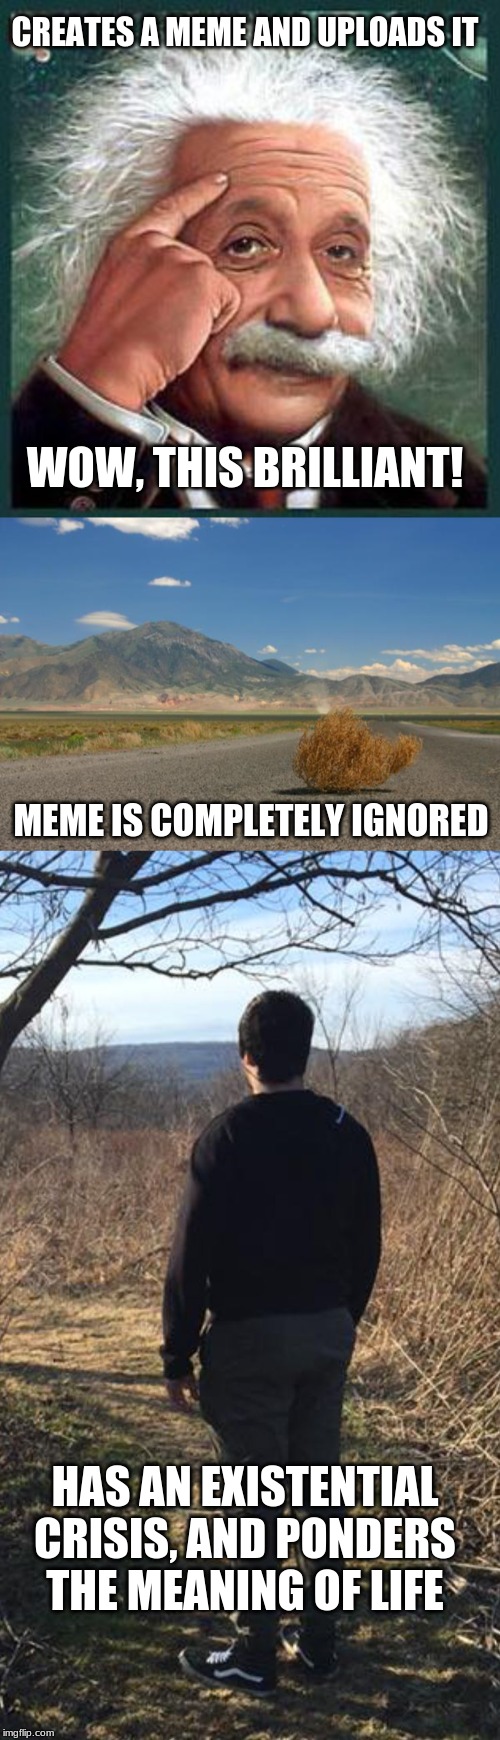 A life of a memer | CREATES A MEME AND UPLOADS IT; WOW, THIS BRILLIANT! MEME IS COMPLETELY IGNORED; HAS AN EXISTENTIAL CRISIS, AND PONDERS THE MEANING OF LIFE | image tagged in einstein,tumbleweed,rethink your life choices | made w/ Imgflip meme maker